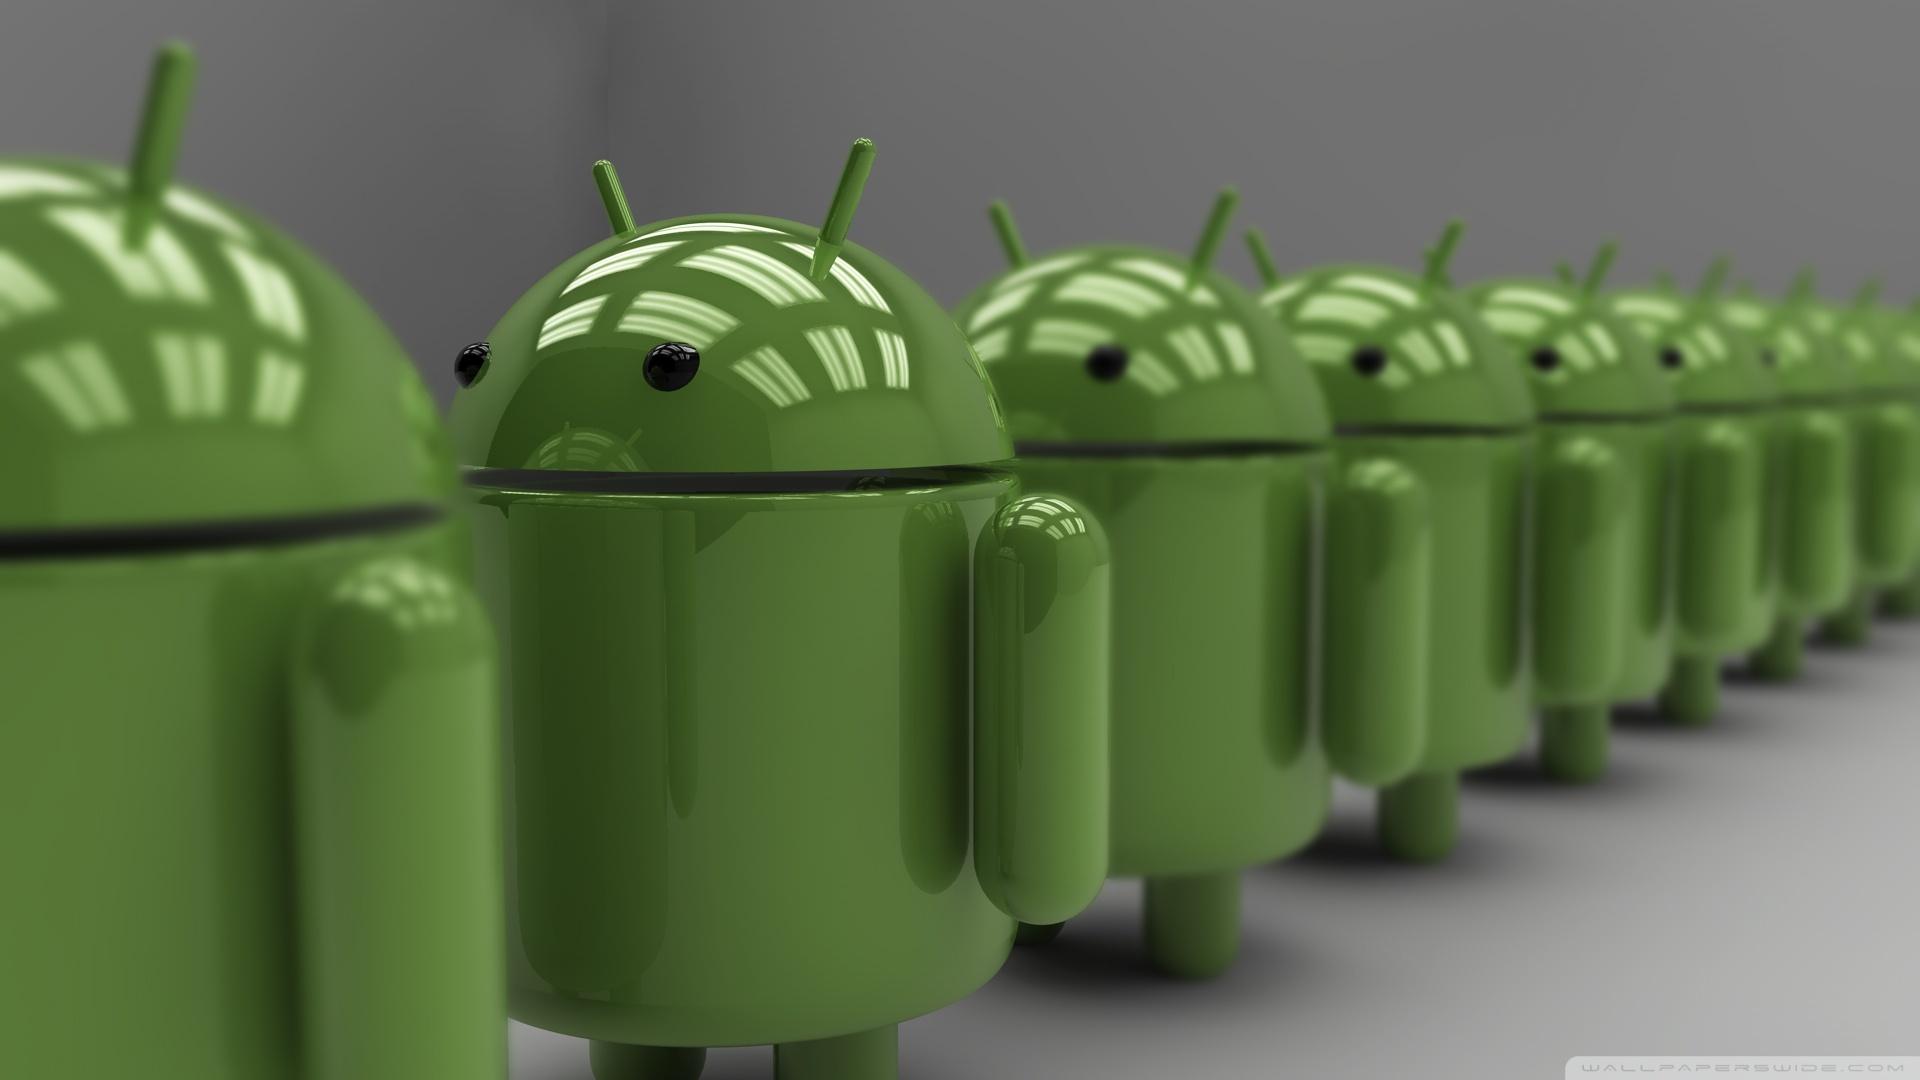 Android Logo Hd Wallpapers Top Free Android Logo Hd Backgrounds Wallpaperaccess